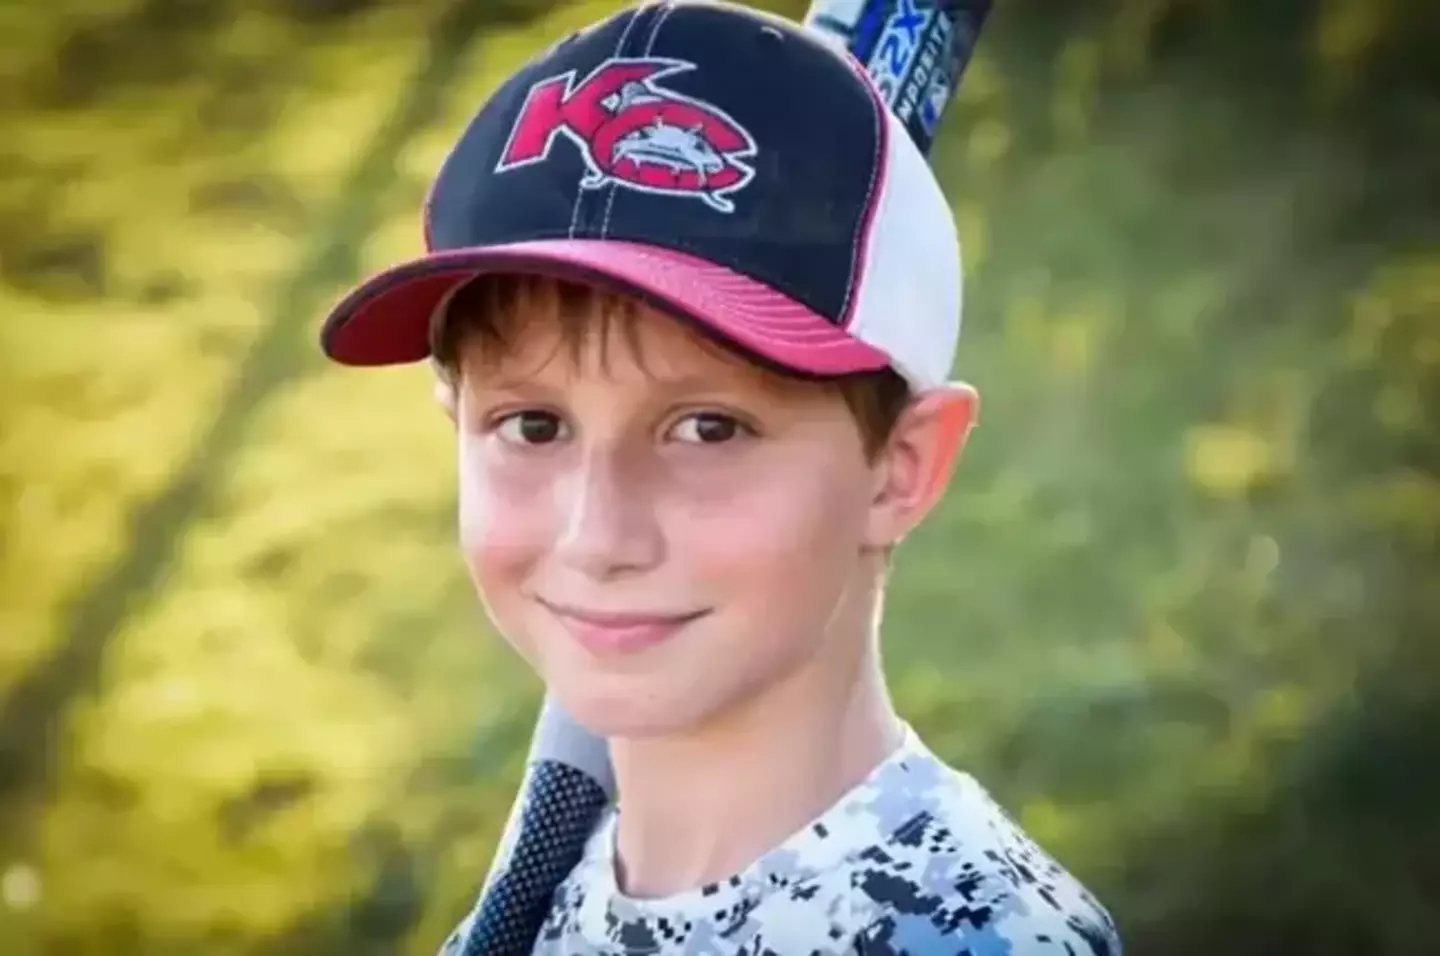 10-year-old Caleb Schwab died when he was thrown from his raft on the world's tallest waterslide.